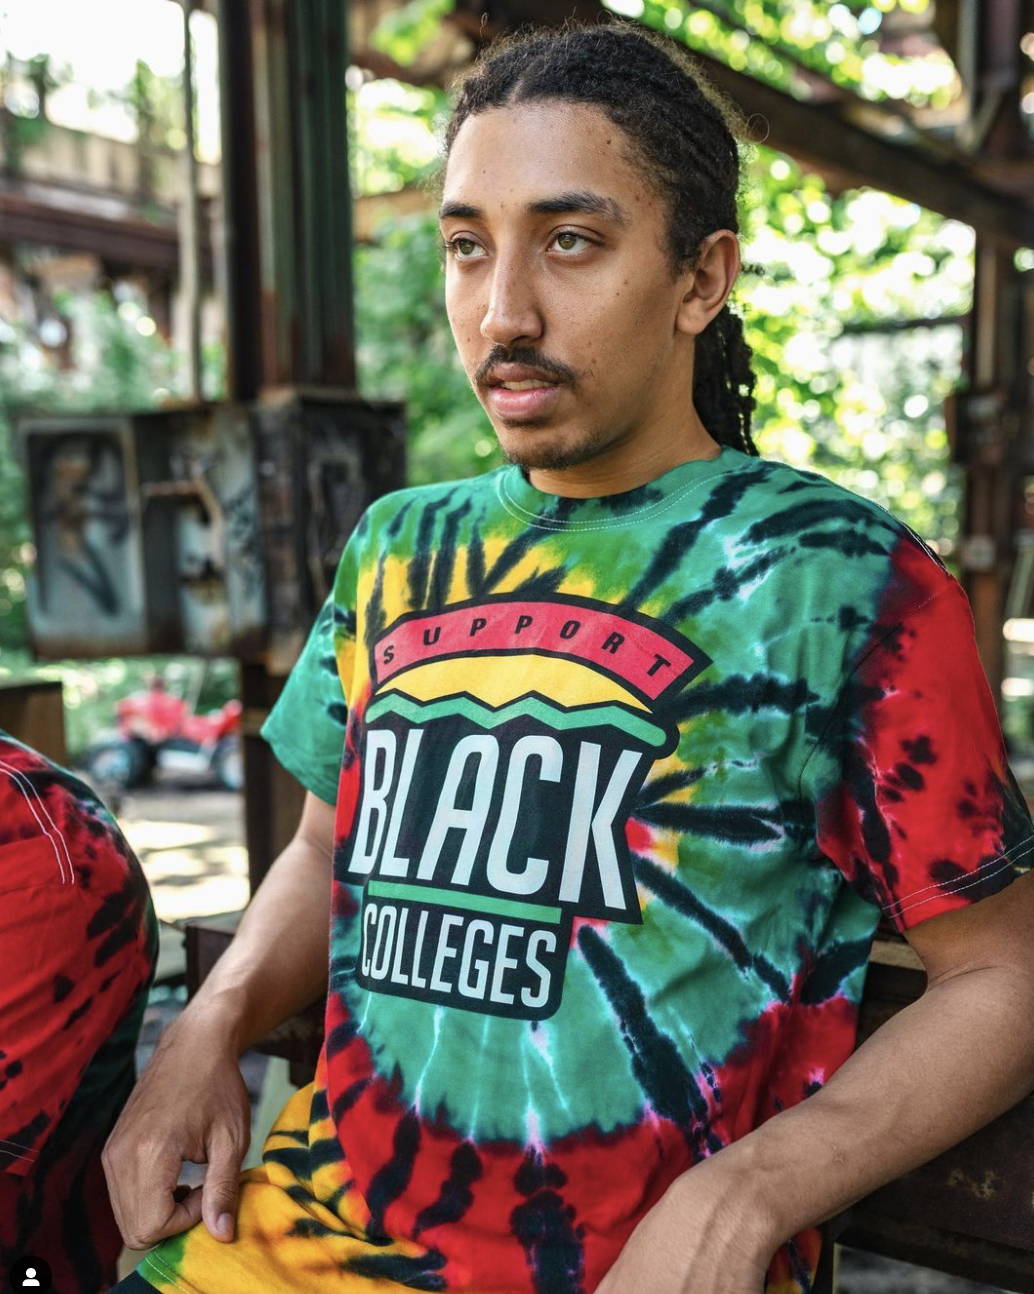 Support Black Colleges Tee